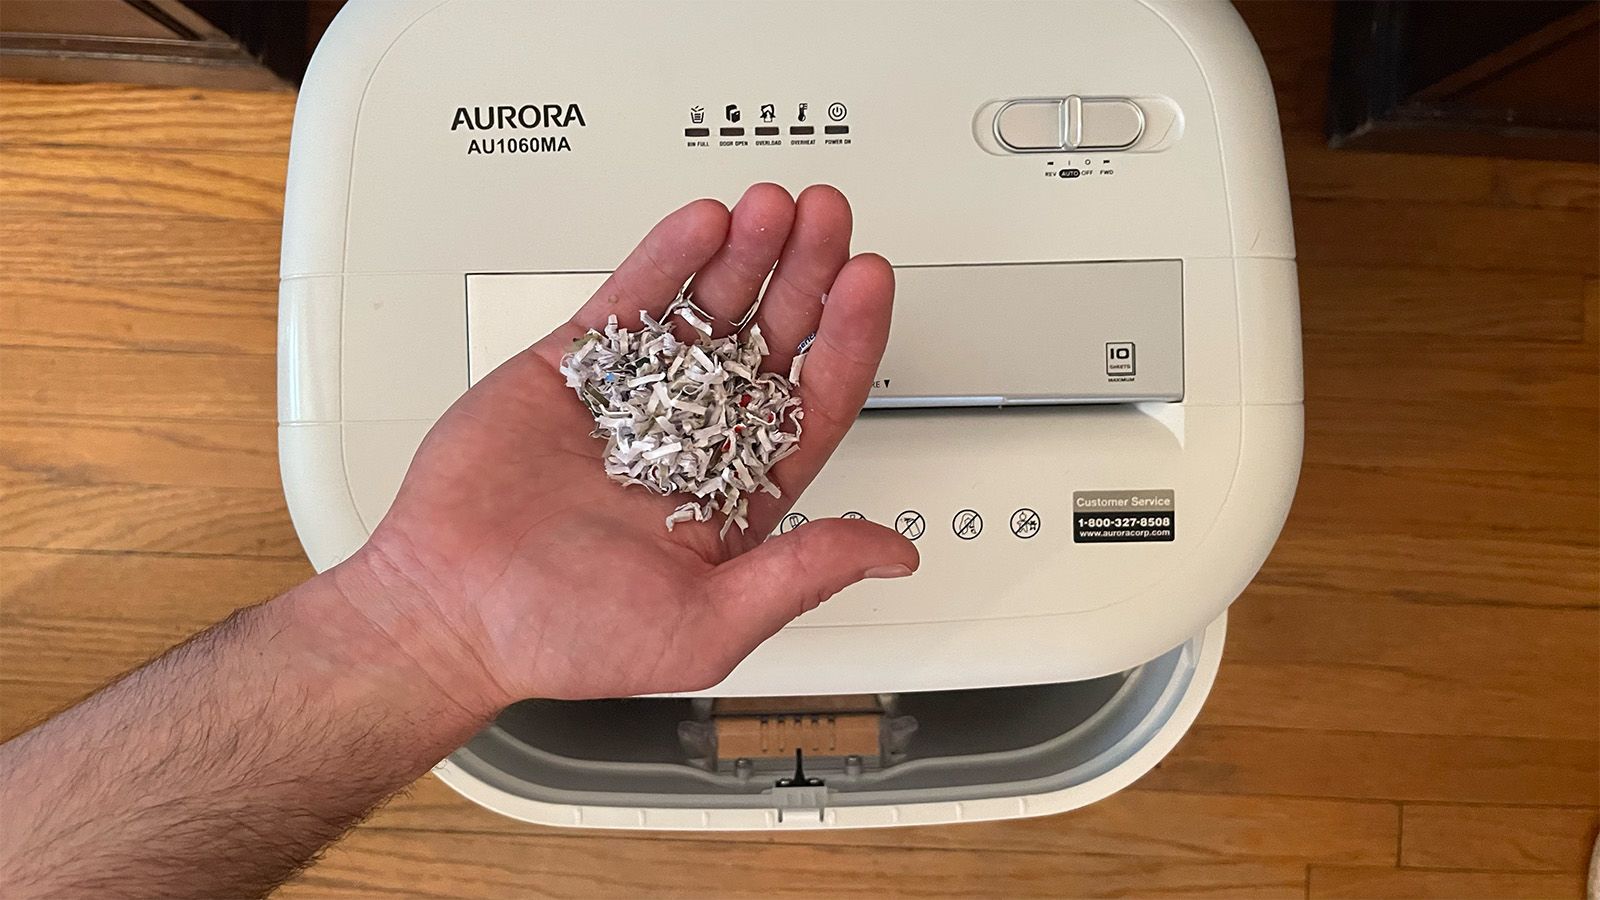 The P-5 security rated Aurora AU1060MA created finer pieces than the other similarly-priced models we tested, making for shredded documents that would be very difficult for any potential identity thief to reassemble.